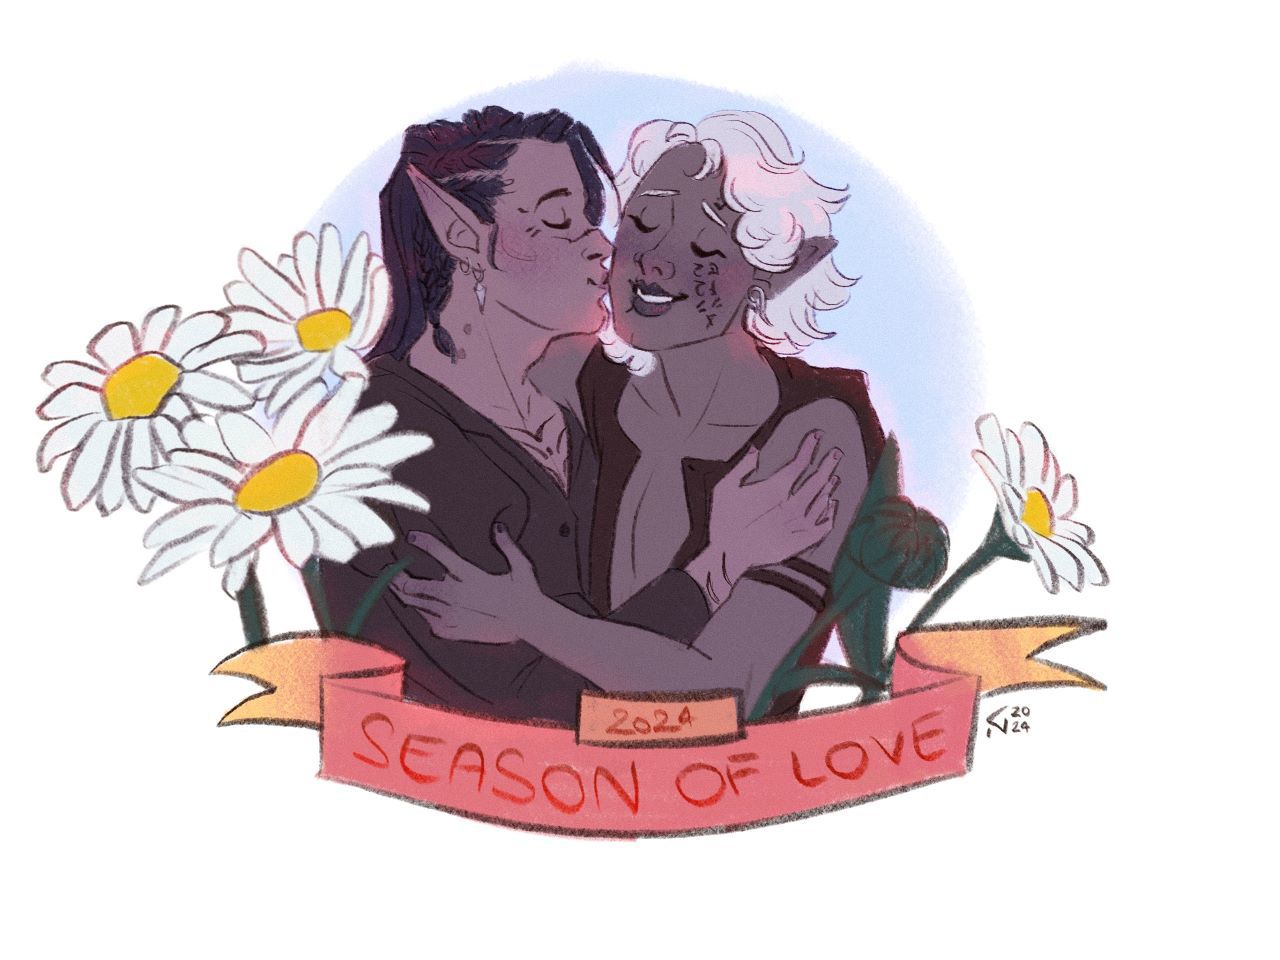 Part Two for Season of Love commissions